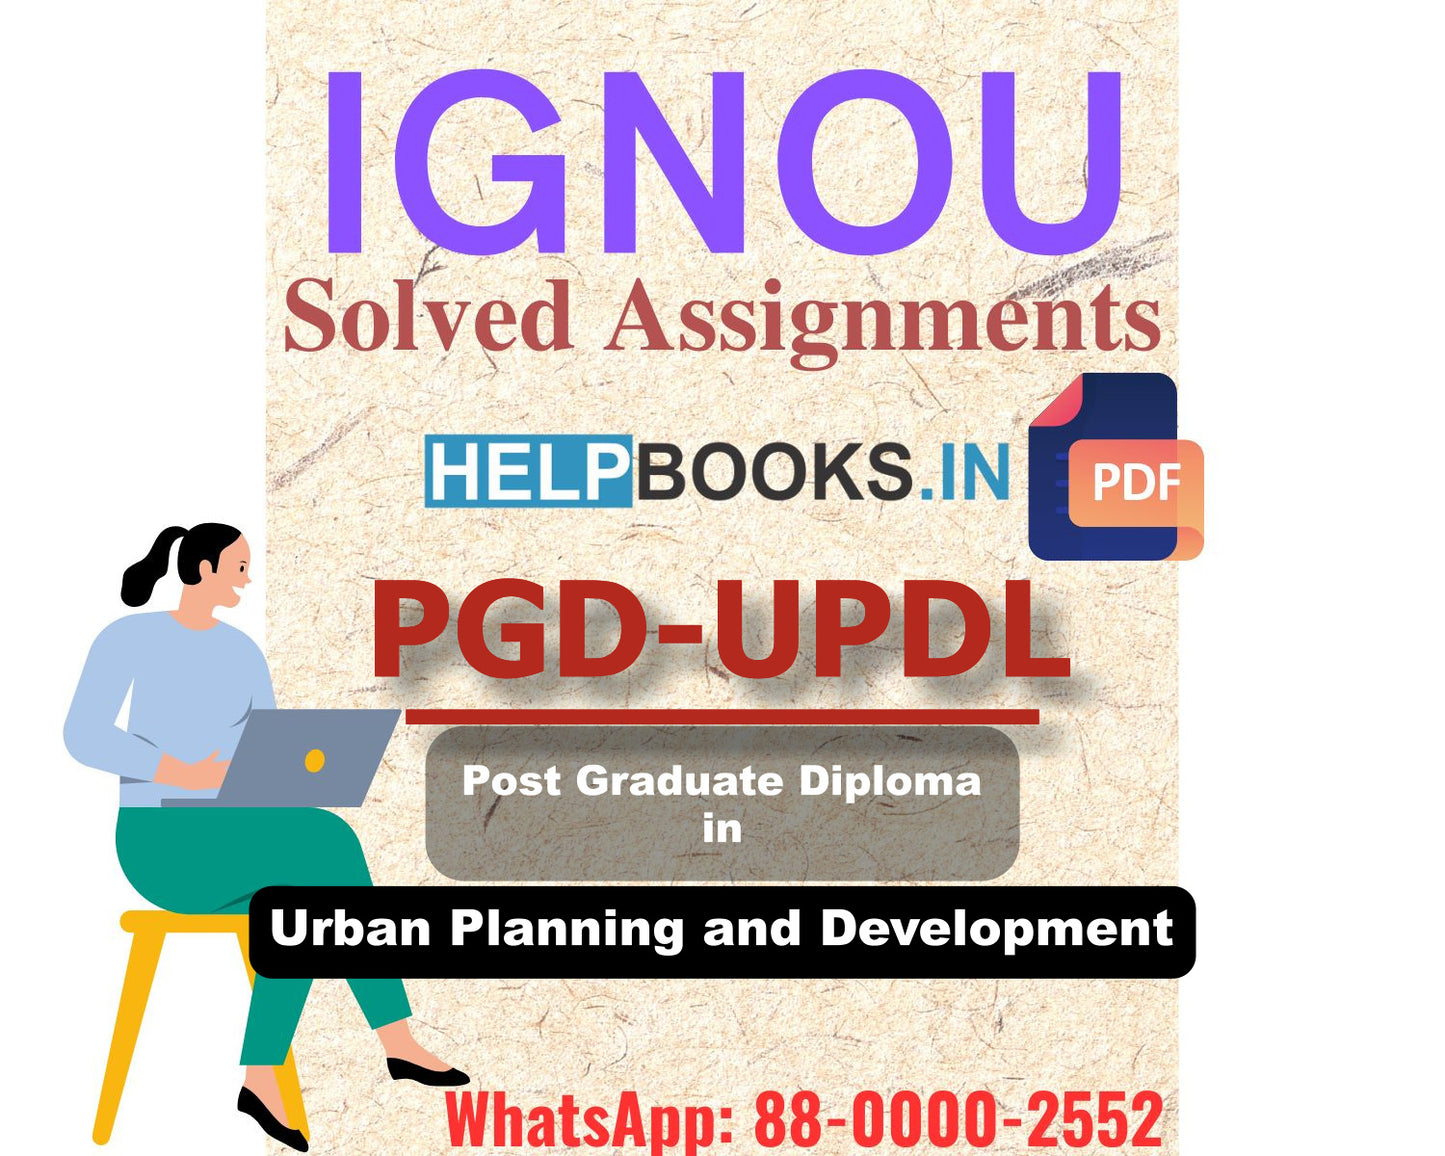 IGNOU PGDUPDL 2023 Solved Assignment-Post Graduate Diploma in Urban Planning and Development